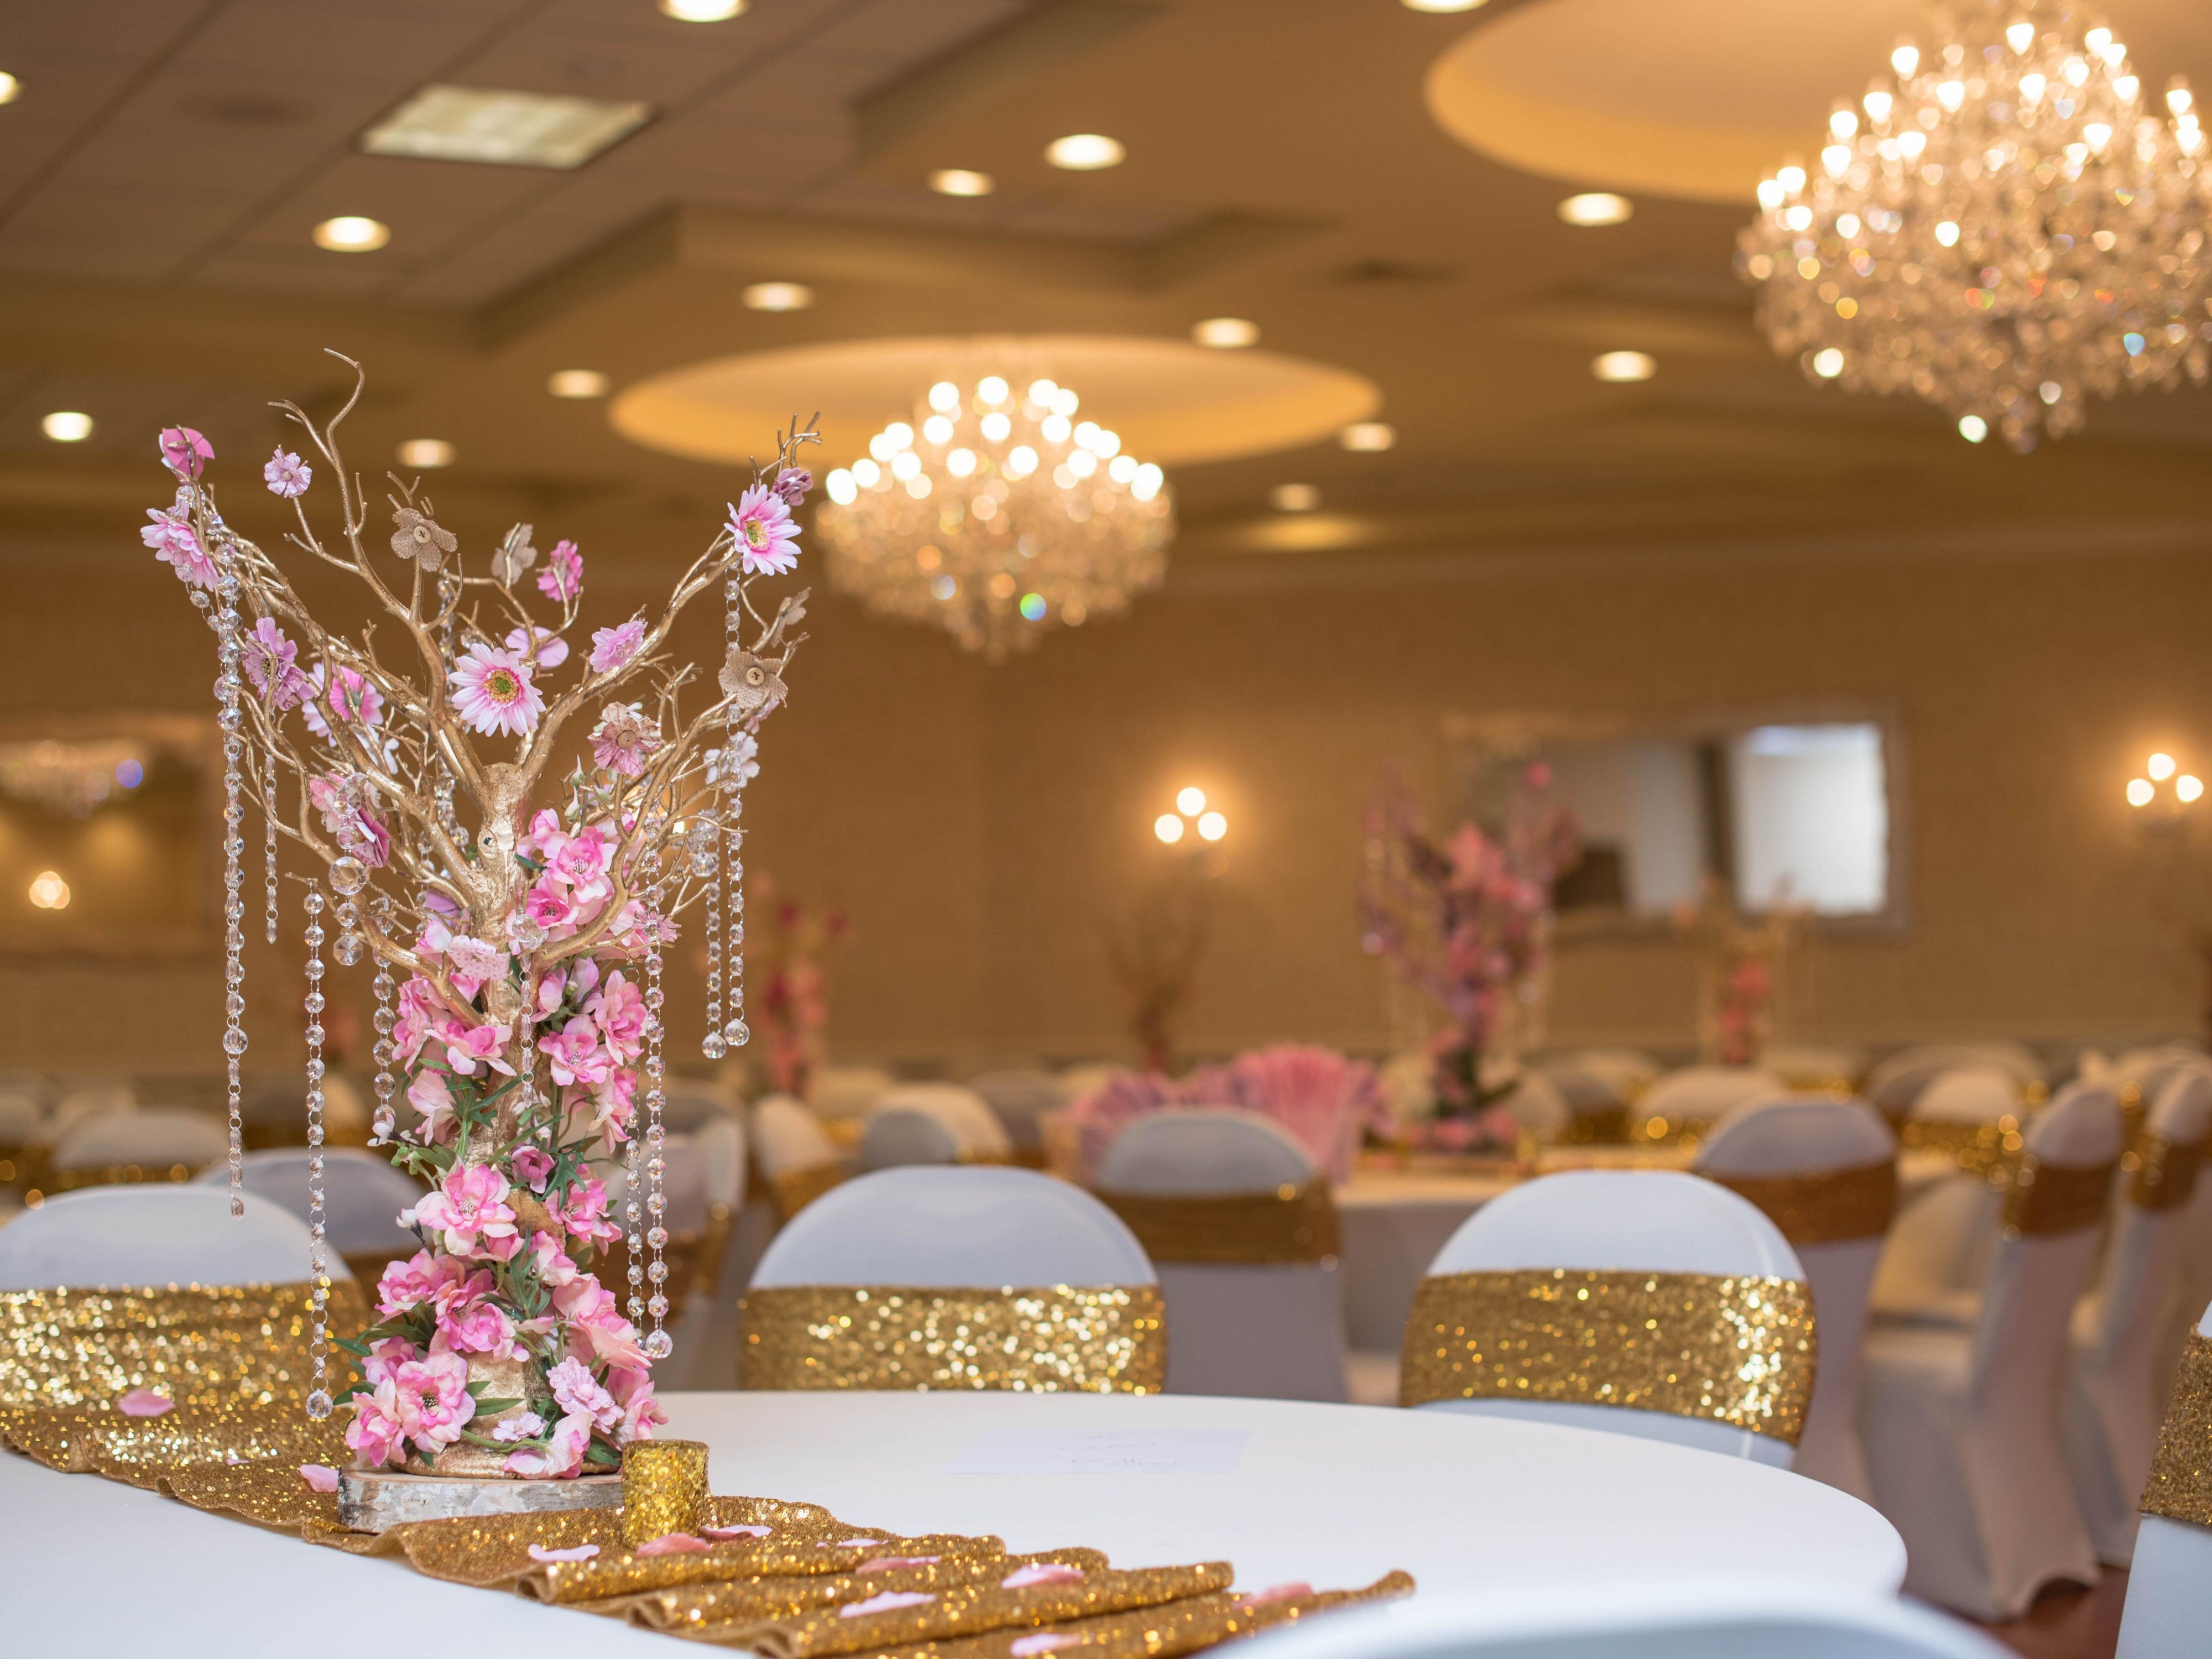 Our exquisite Windsor Ballroom is perfect for your next event. Available for weddings, sweet 16 parties, bat mitzvahs, and more! If you have questions or would you like to book your meeting or event by phone, contact us at 1-609-448-7000. 